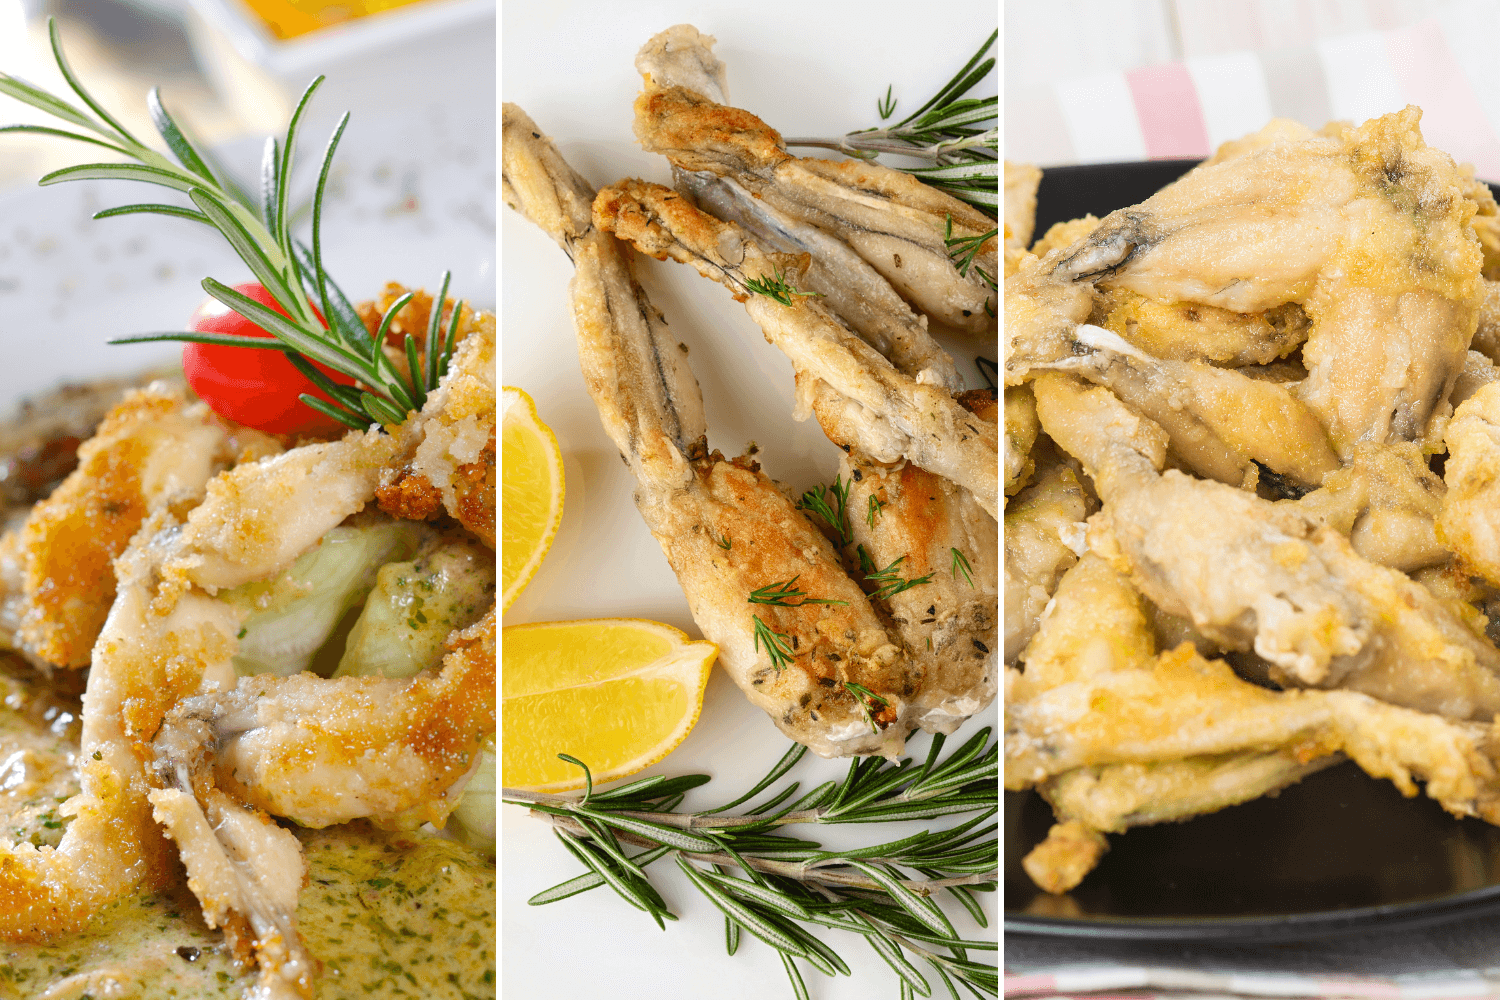 Can I eat frog legs while pregnant?